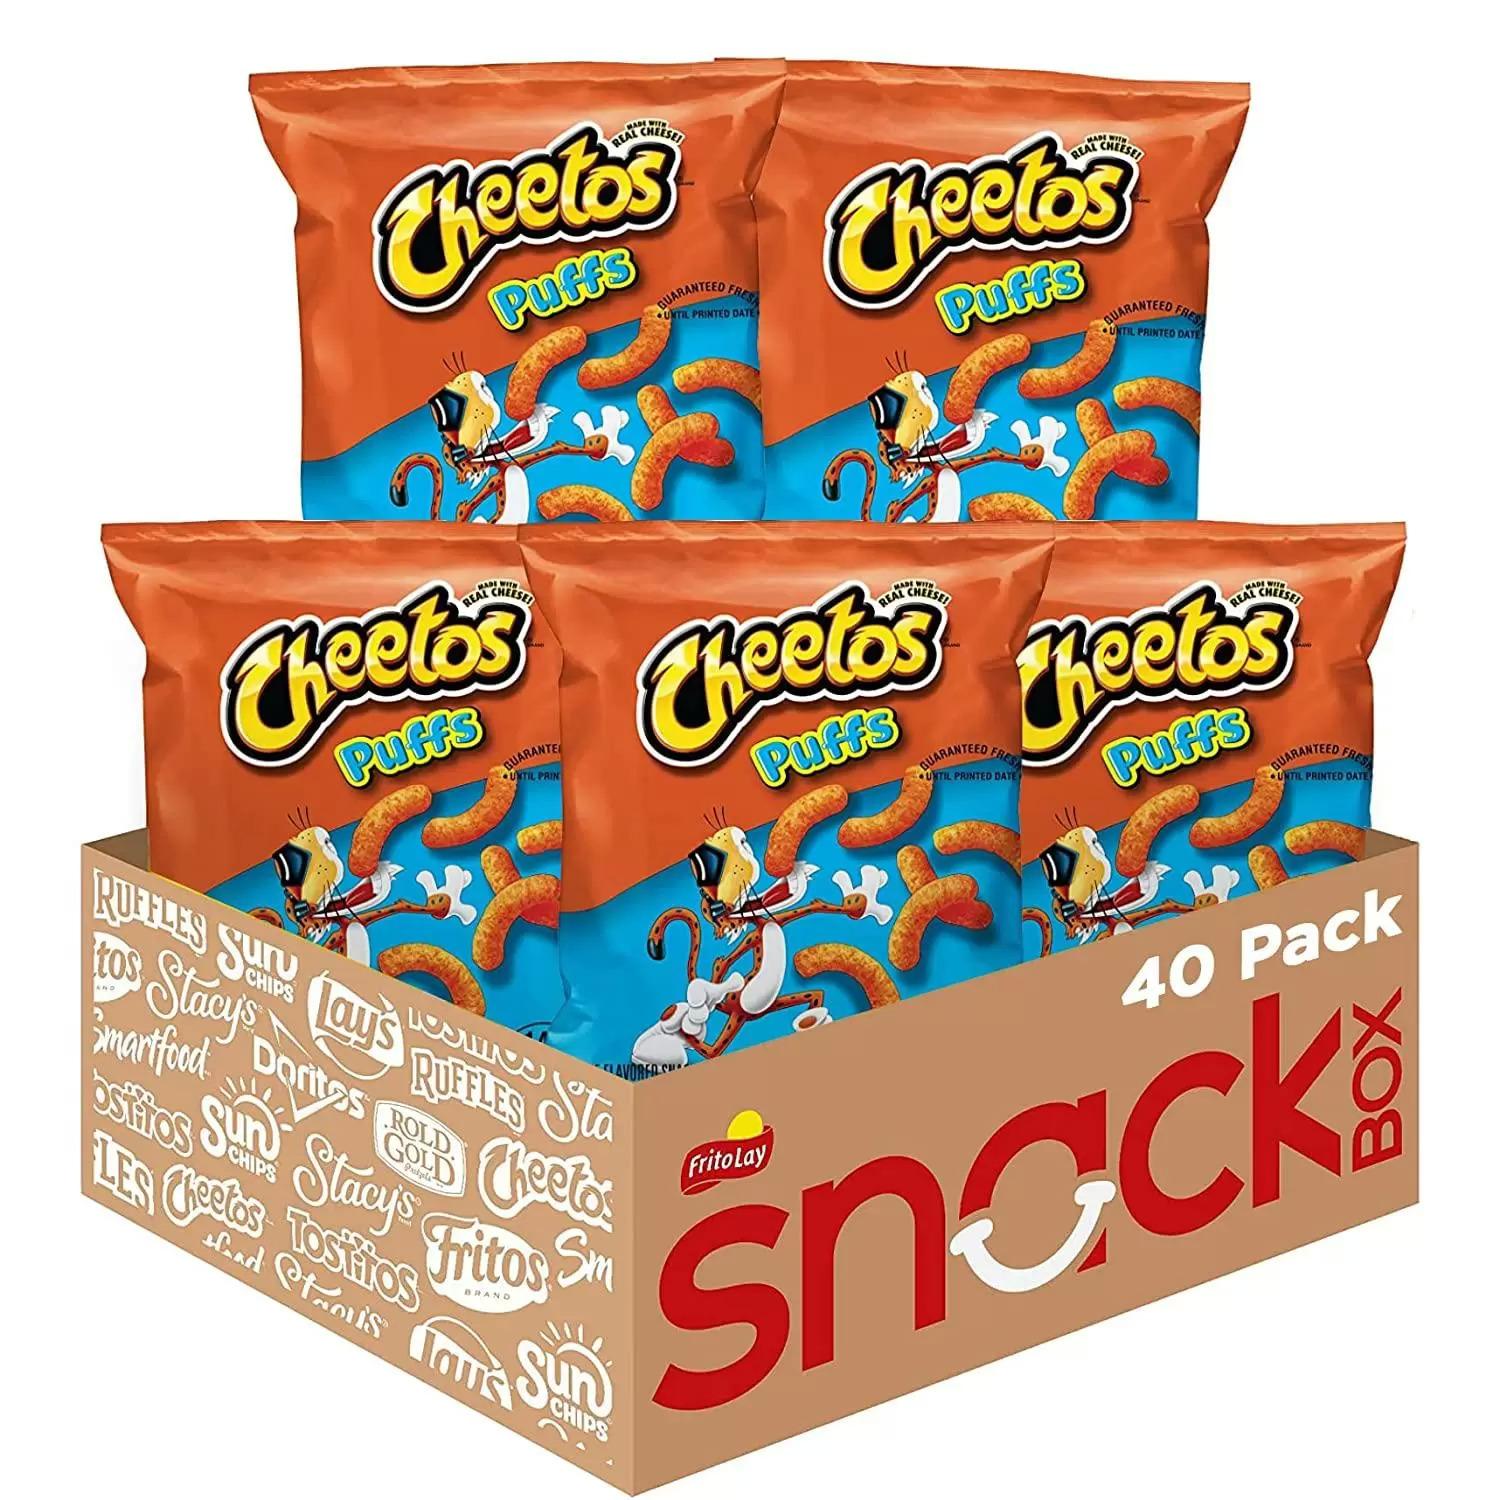 Cheetos Puffs Cheese Flavored Snacks 40 Pack for $12.90 Shipped